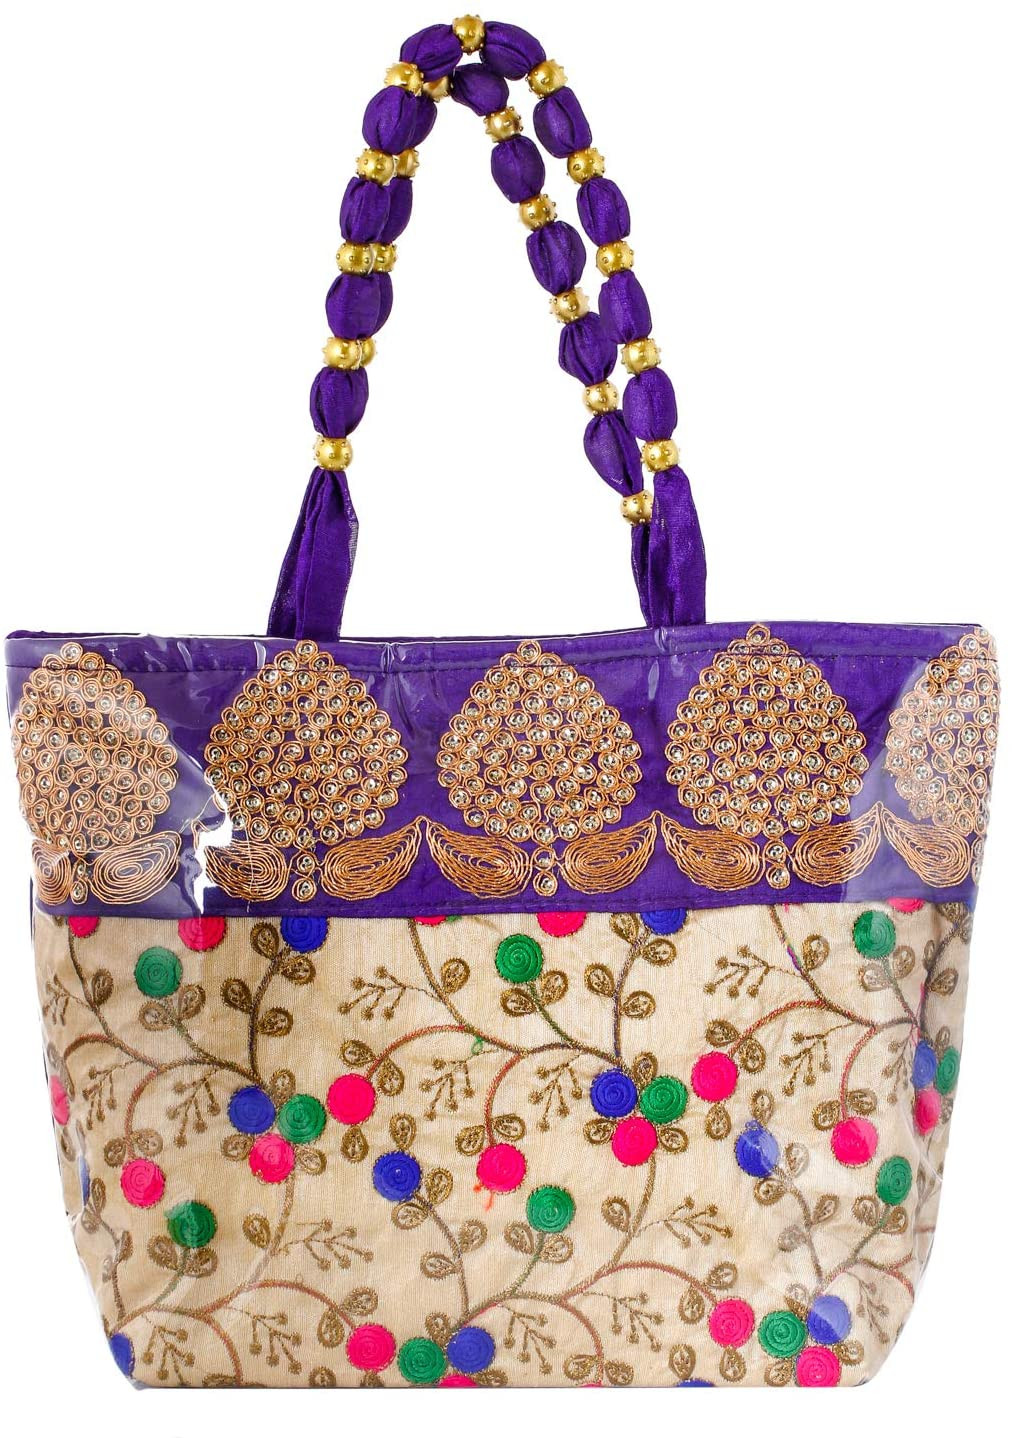 Kuber Industries Laminated Embroidery Hand Bag, Tote Bag, Purse For All Occasion For Women & Girls (Purple)